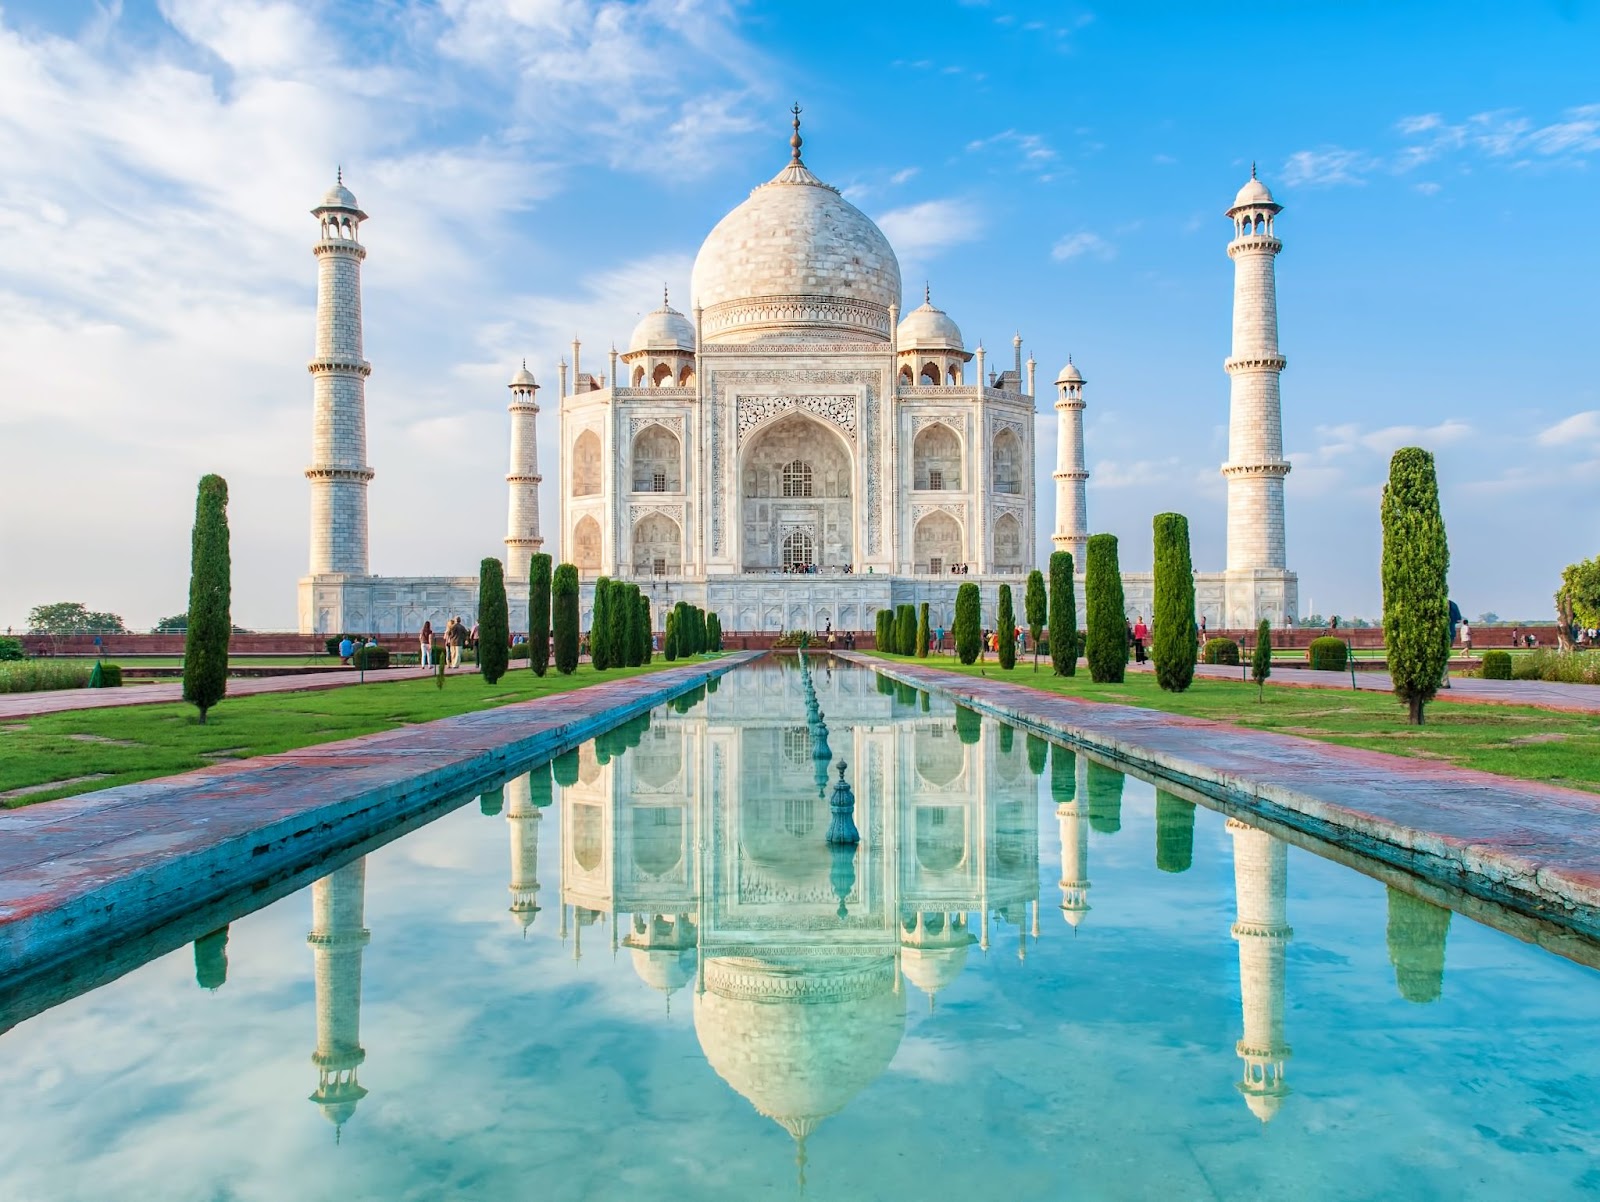 The Taj Mahal, India - 23 Top Sights to See Before You Die